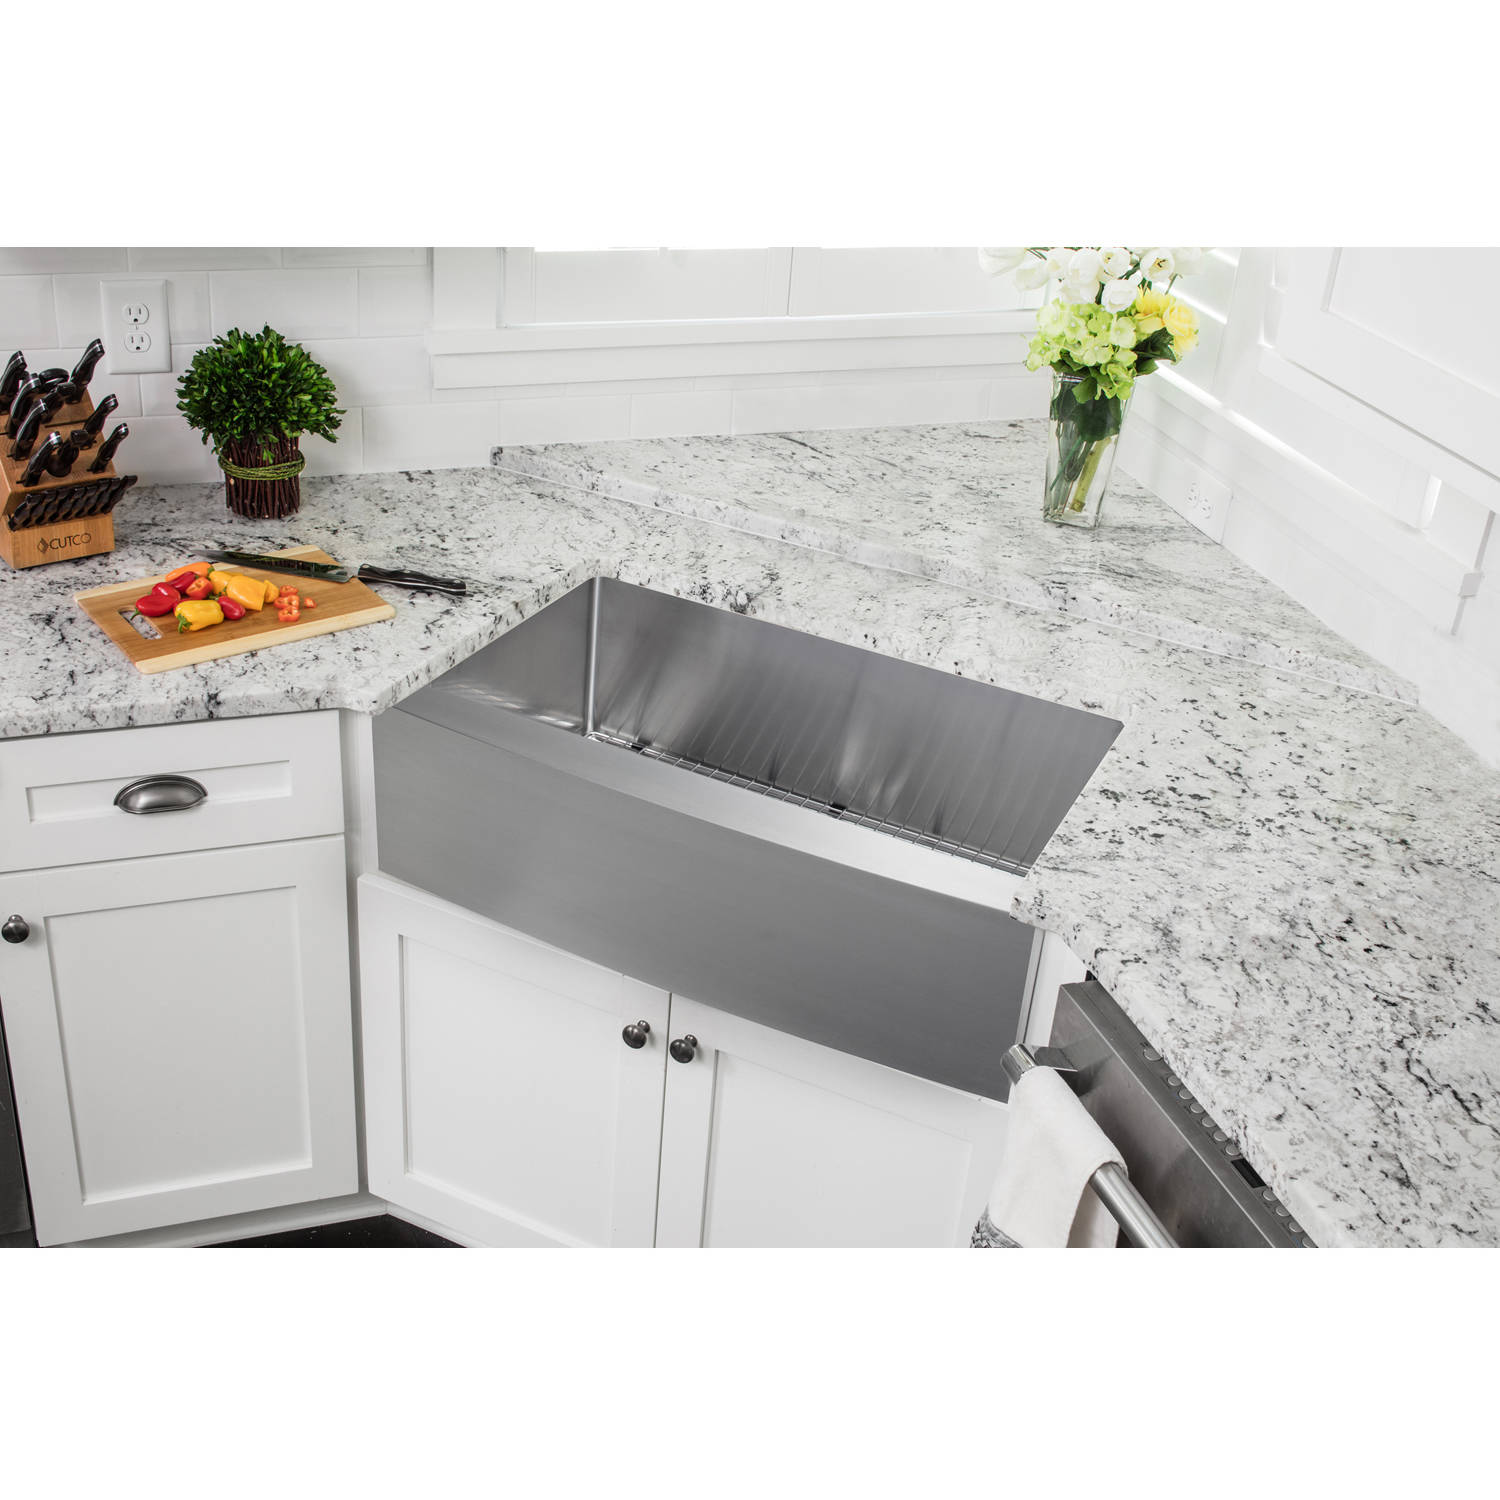 Magnus Sinks 36-in x 20-in 16 Gauge Stainless Steel Apron Front Single Bowl Kitchen Sink with Arc Kitchen Faucet - image 5 of 7